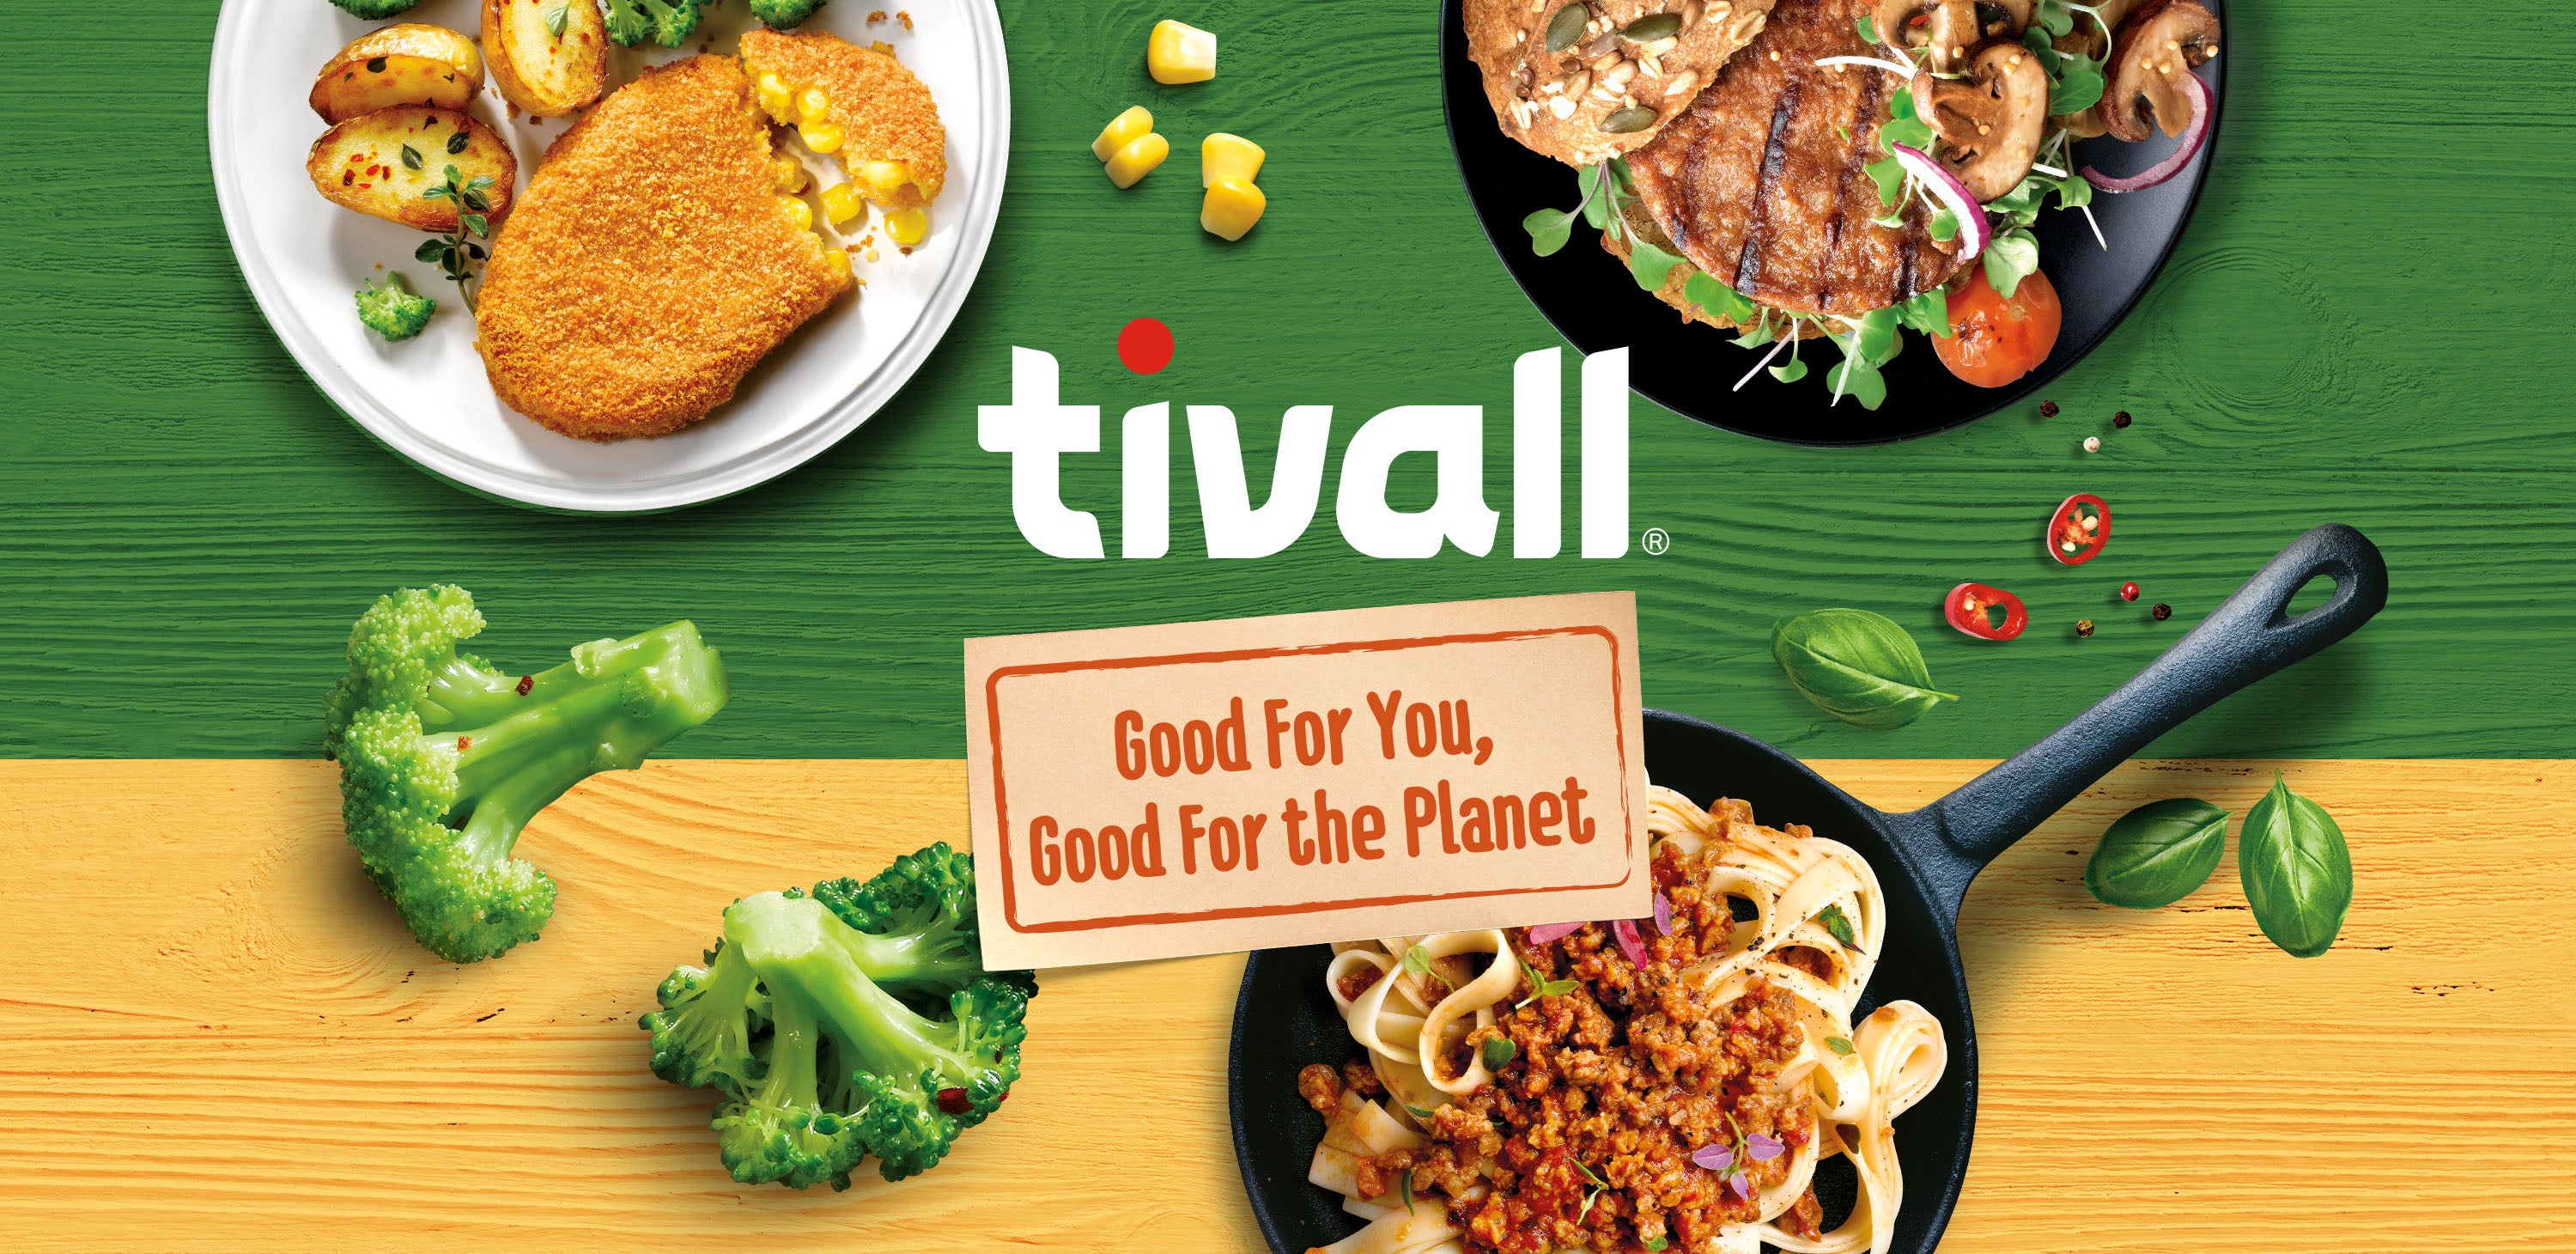 Tivall Brand page main banner